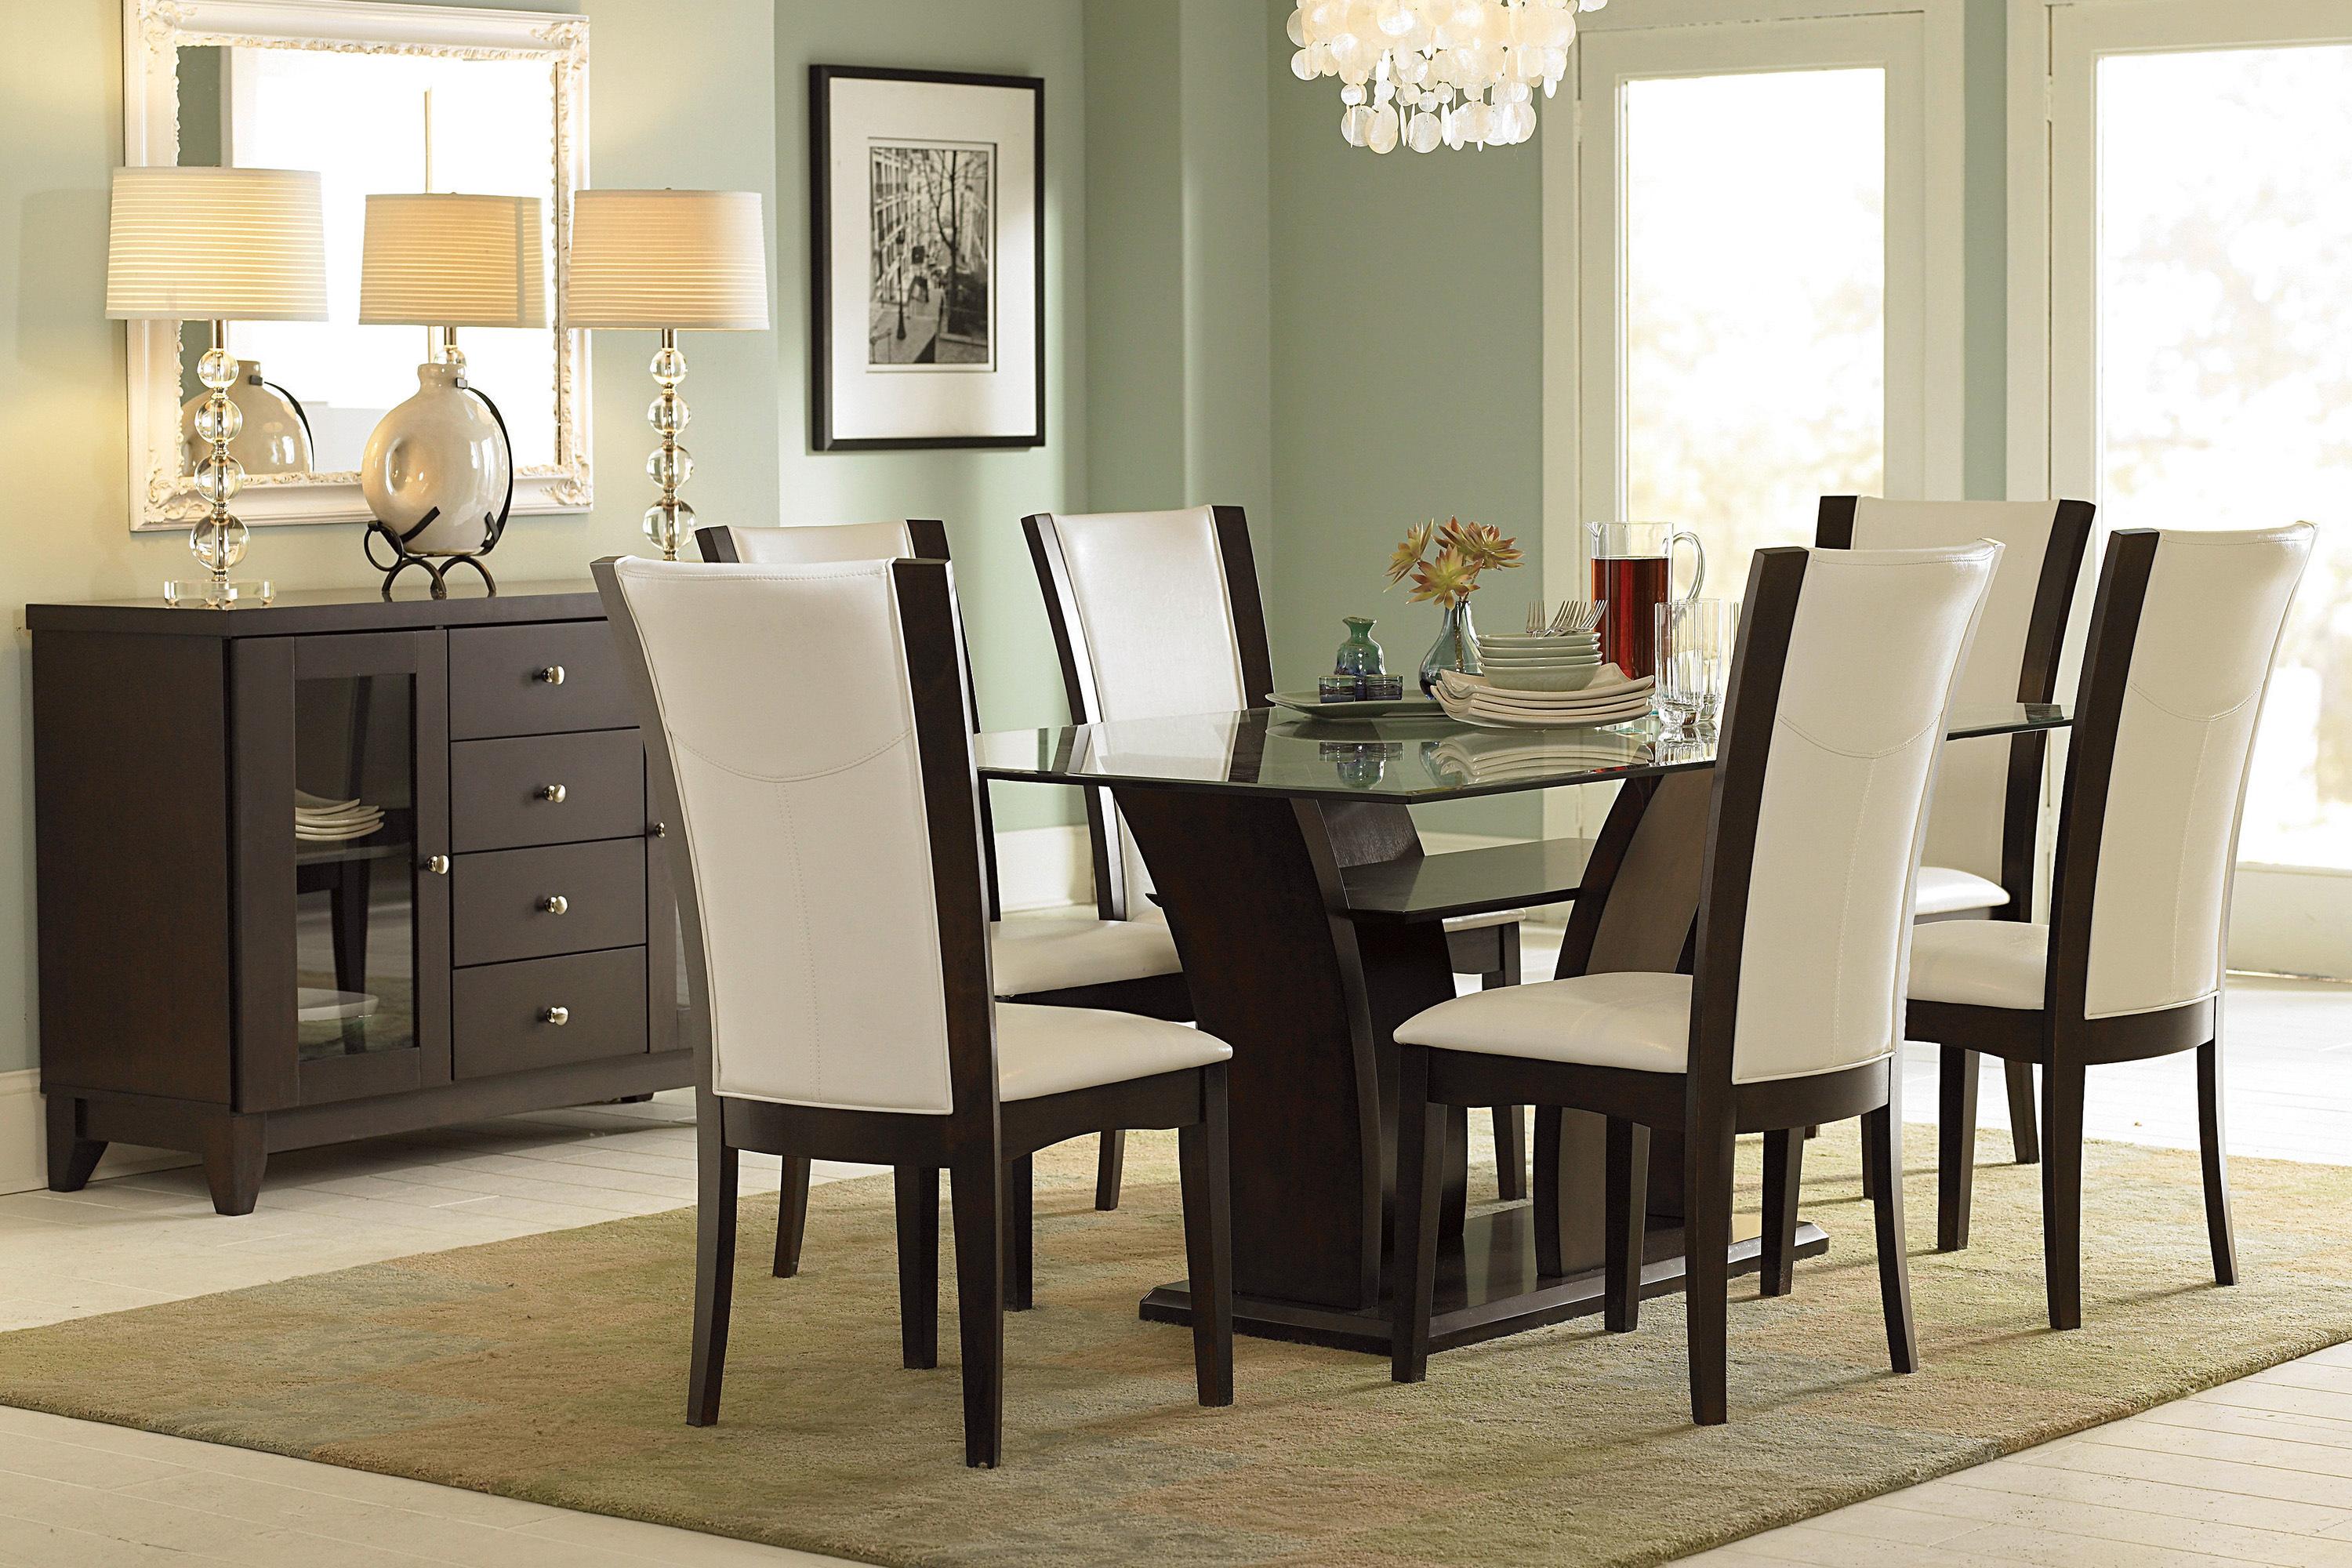 Contemporary Dining Room Set 710-71-W-5PC Daisy 710-71-W-5PC in Espresso, White Faux Leather